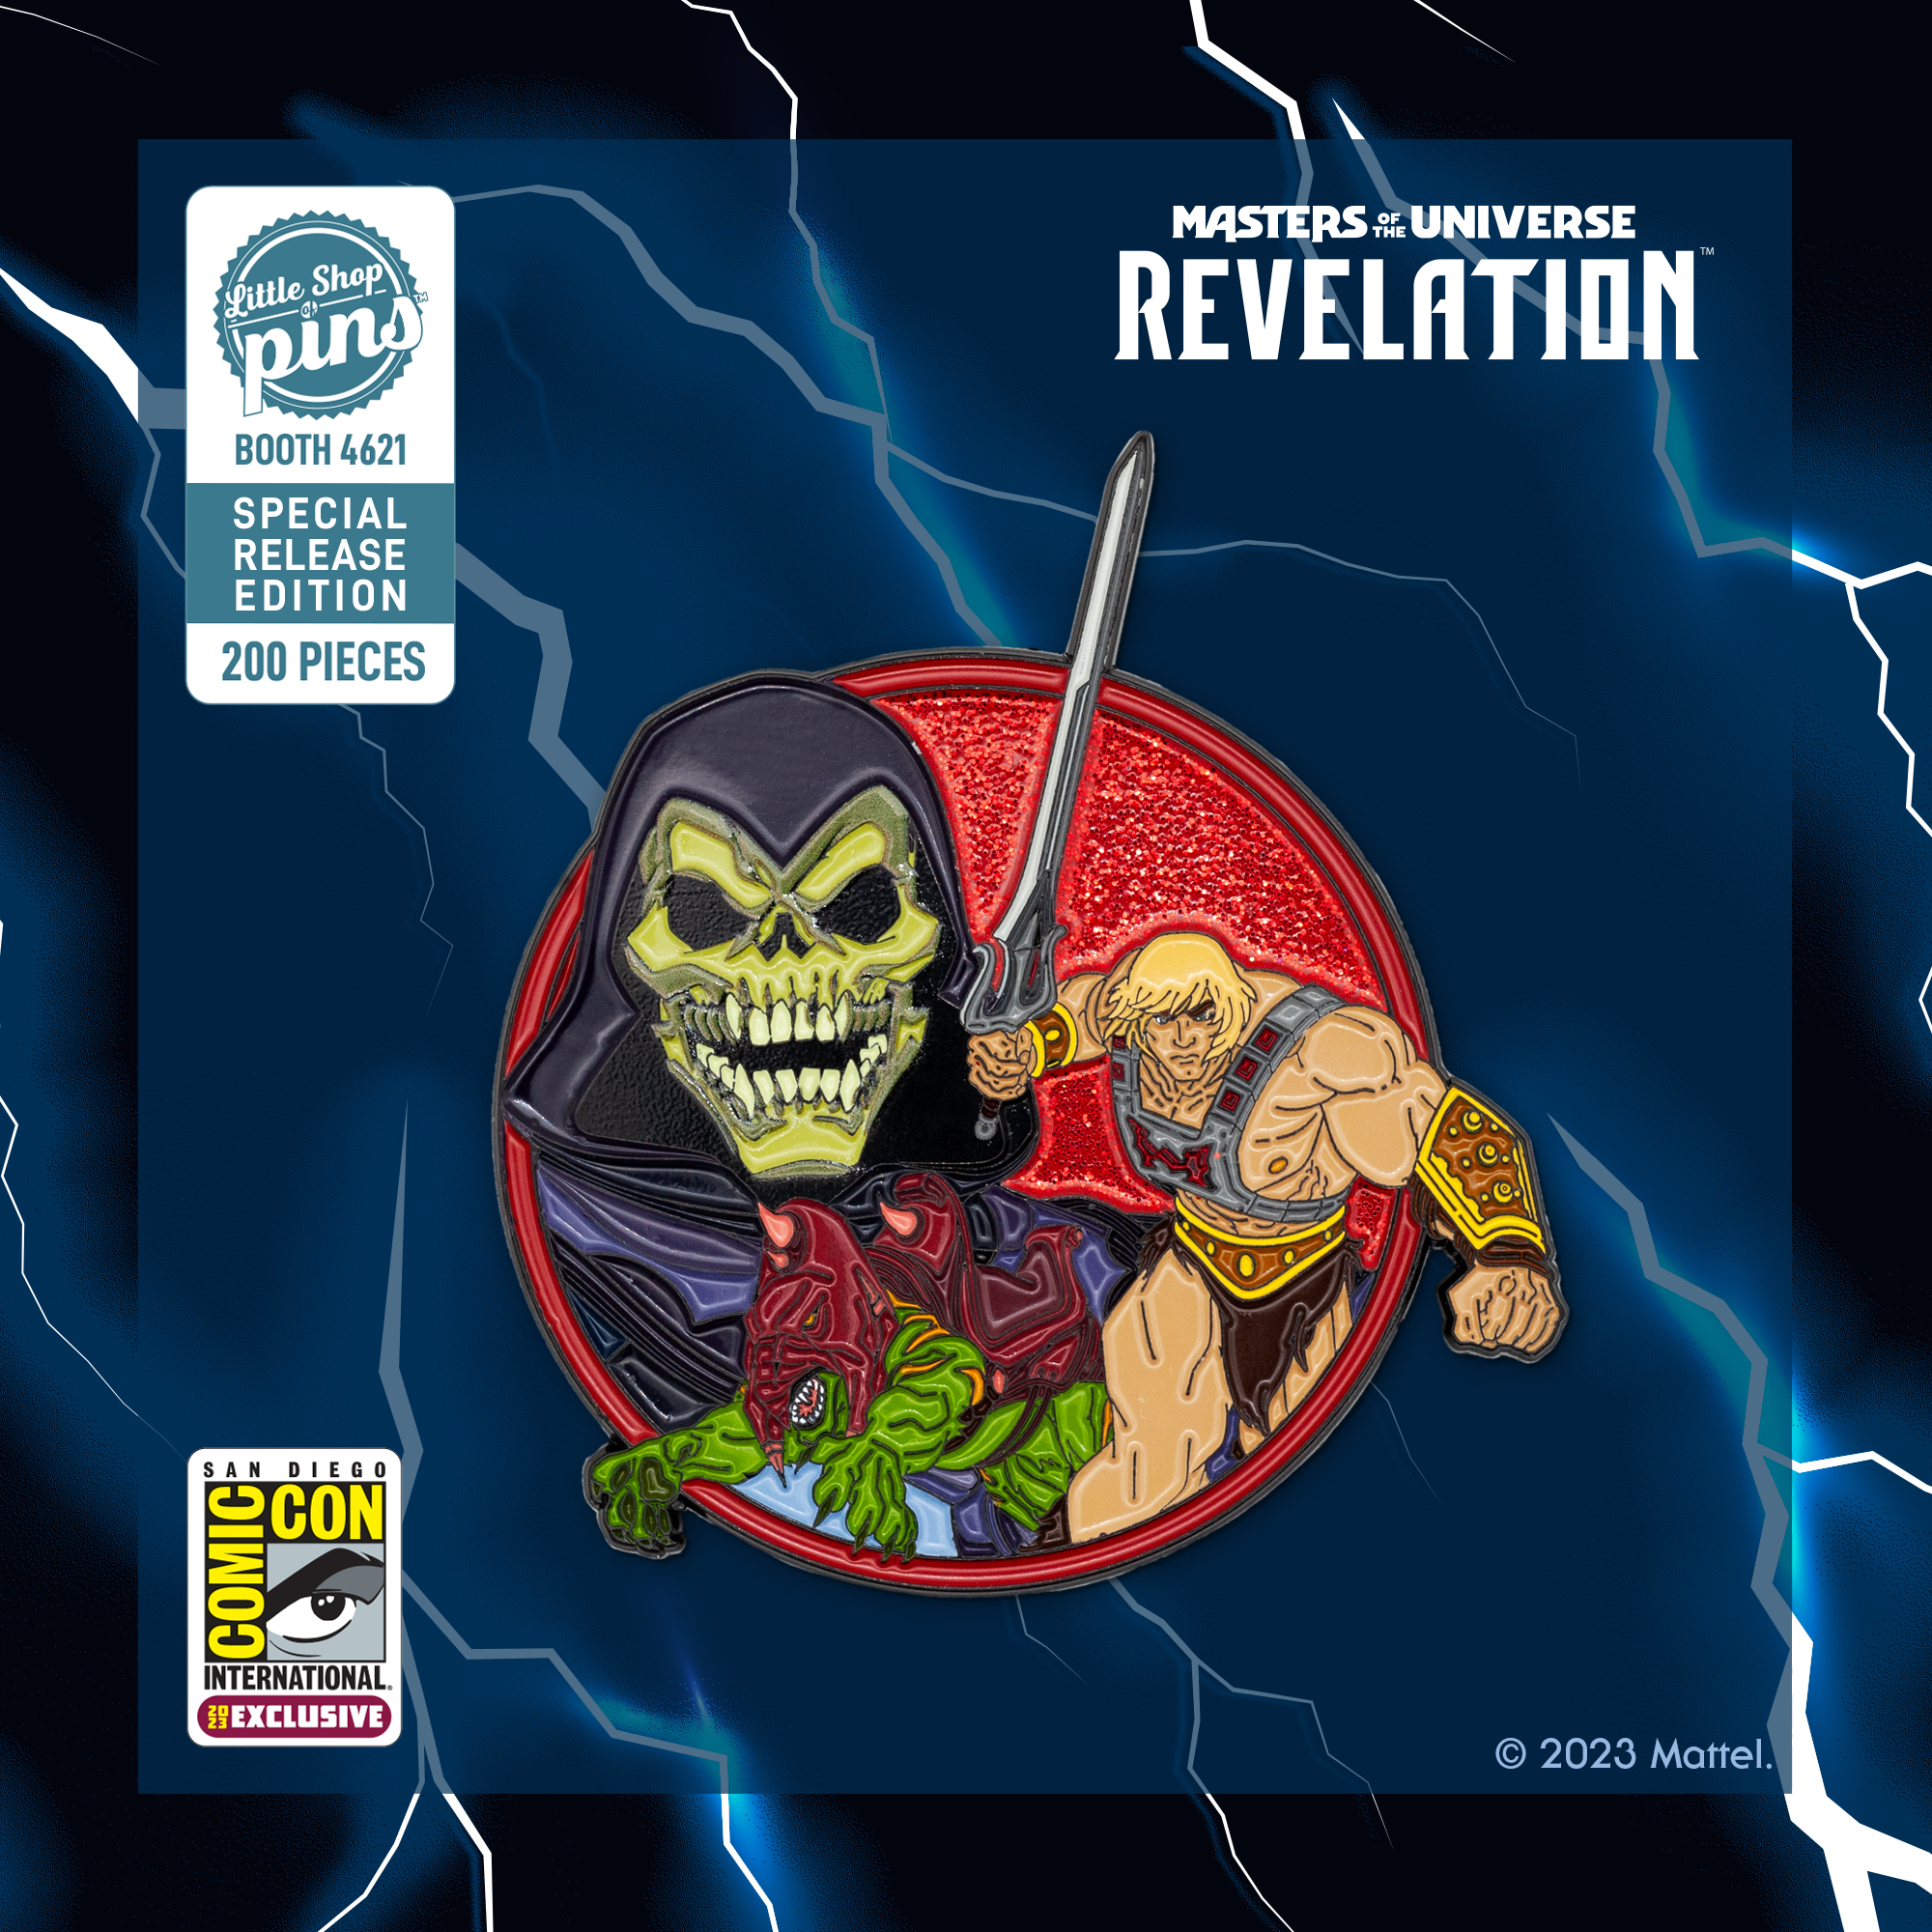 2015 SDCC "Summer Of Syfy" Set of 8 Limited Edition Pins